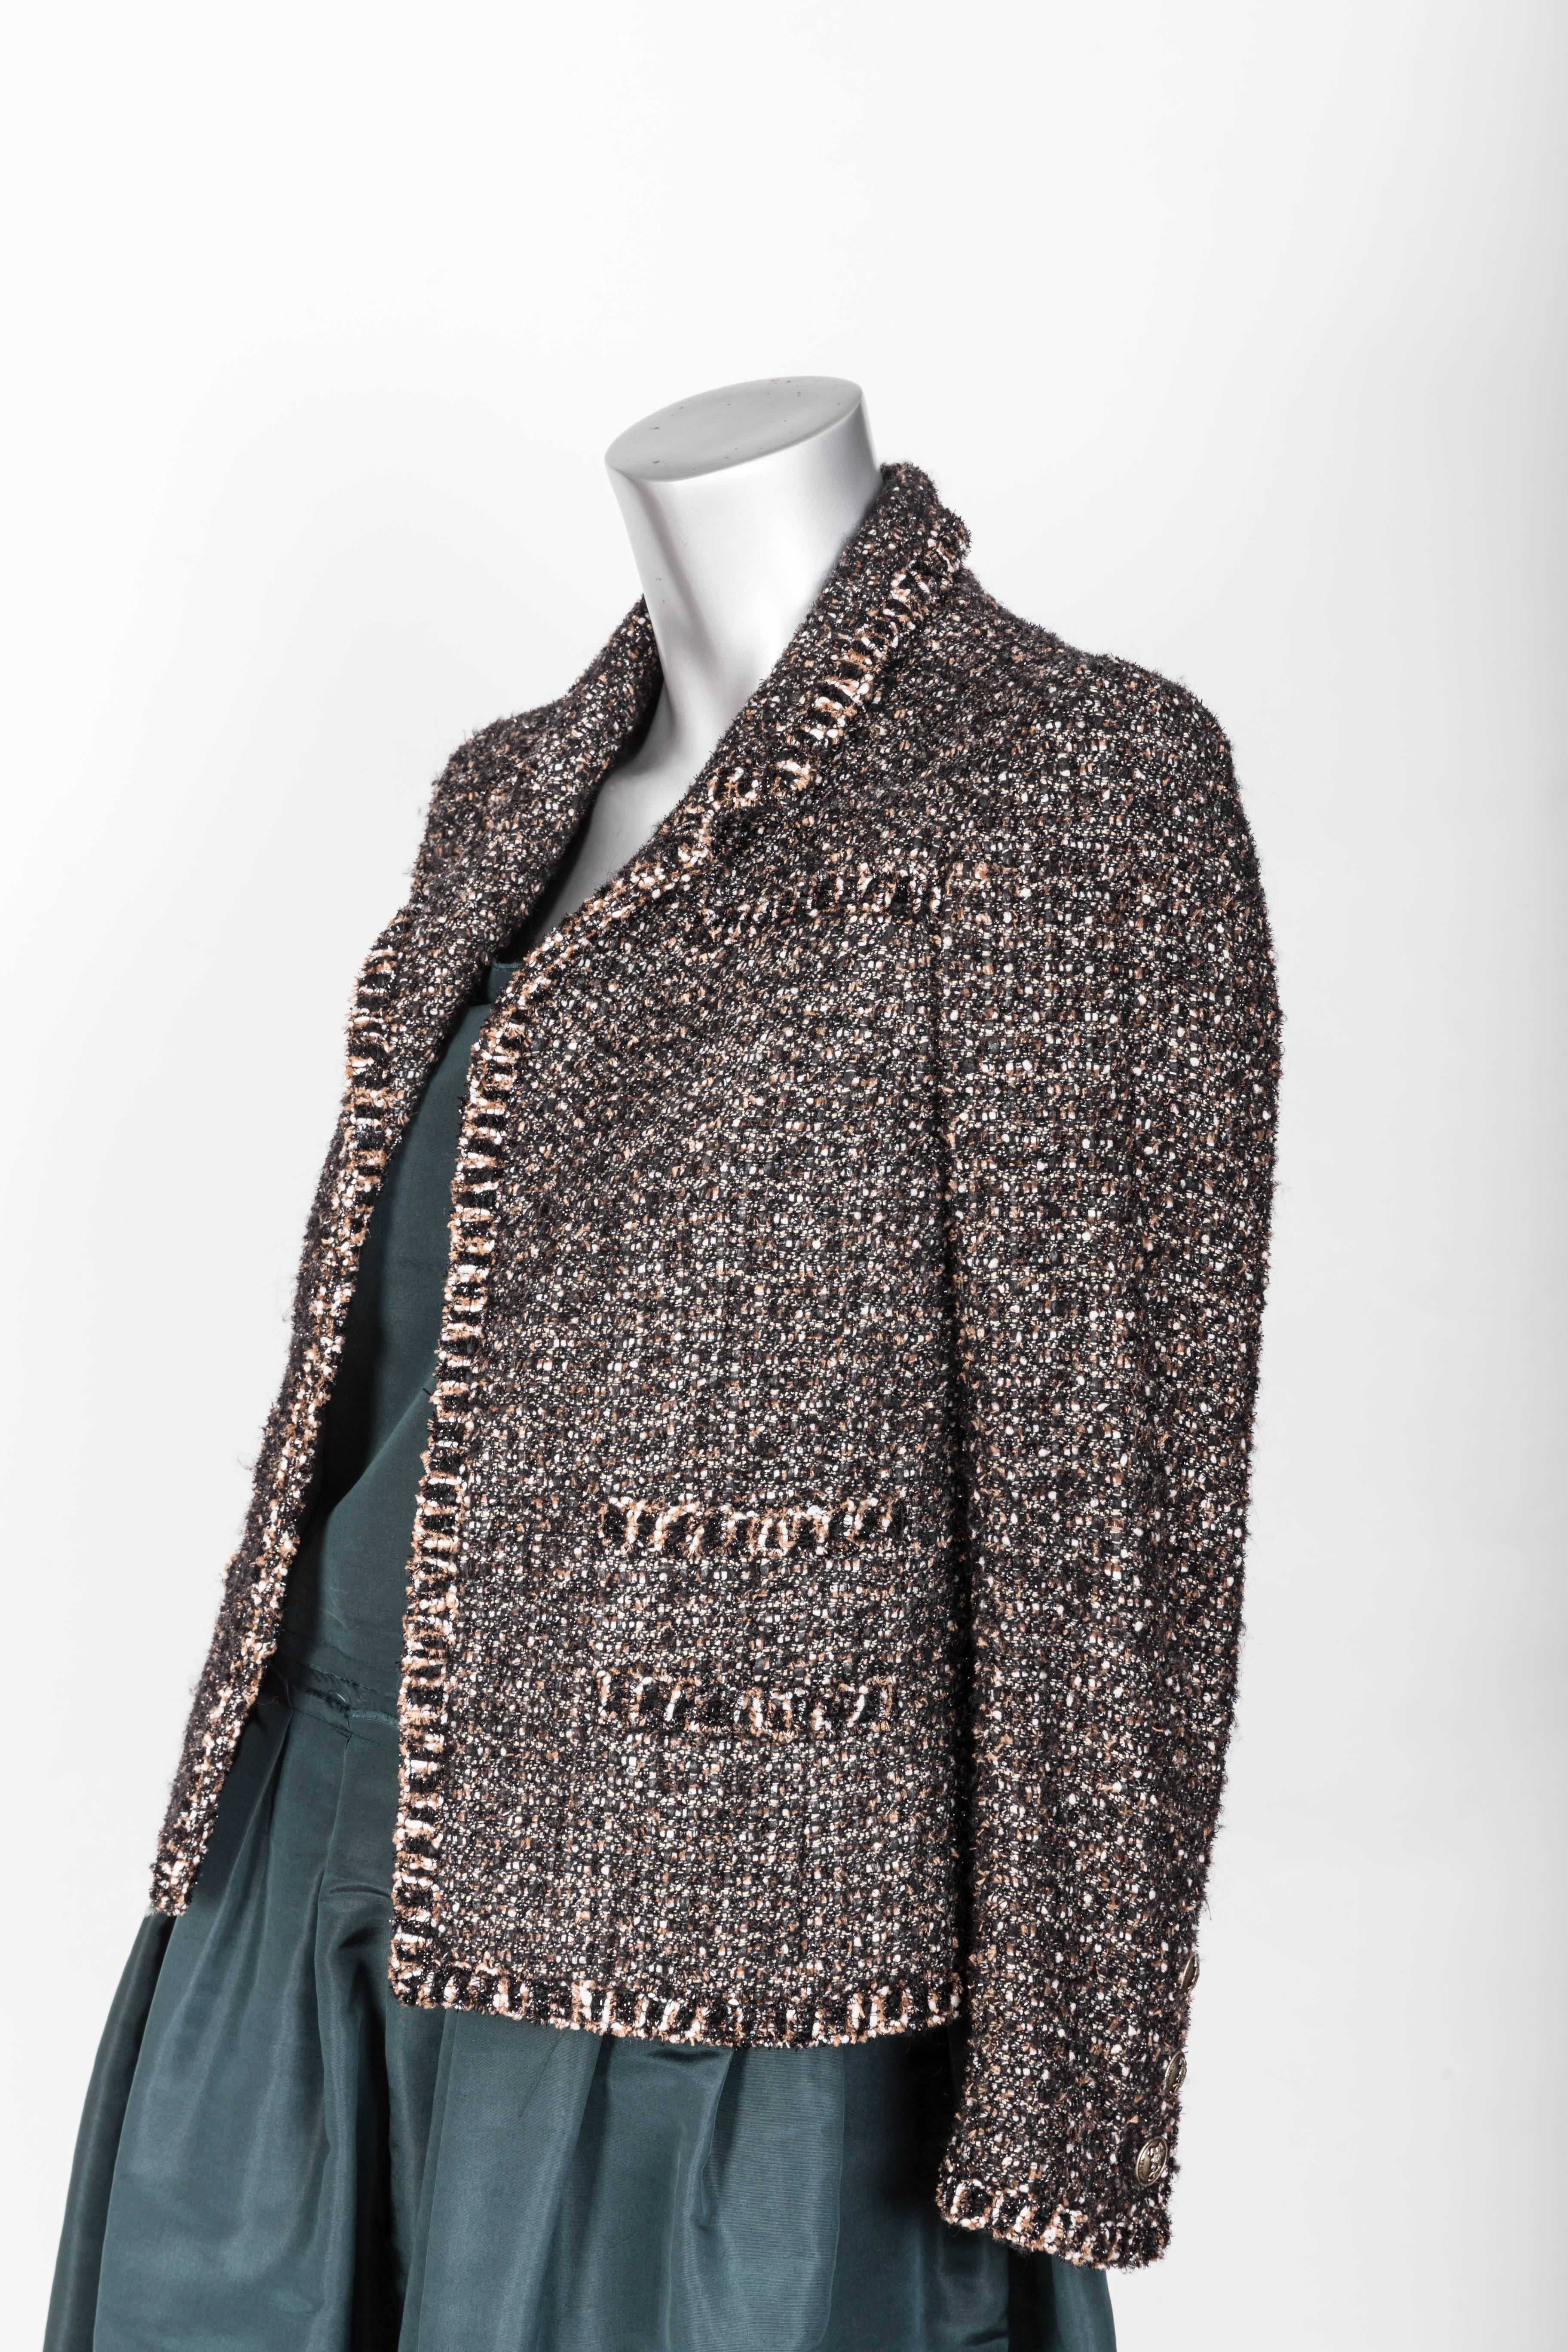 Chic Chanel Tweed Jacket With a Hint of Sparkle - FR 34 / US 2
Hidden Hook and Eye Closure / Single Breasted
Notch Collar
3 Chanel Buttons to Each Cuff
P24398V14928